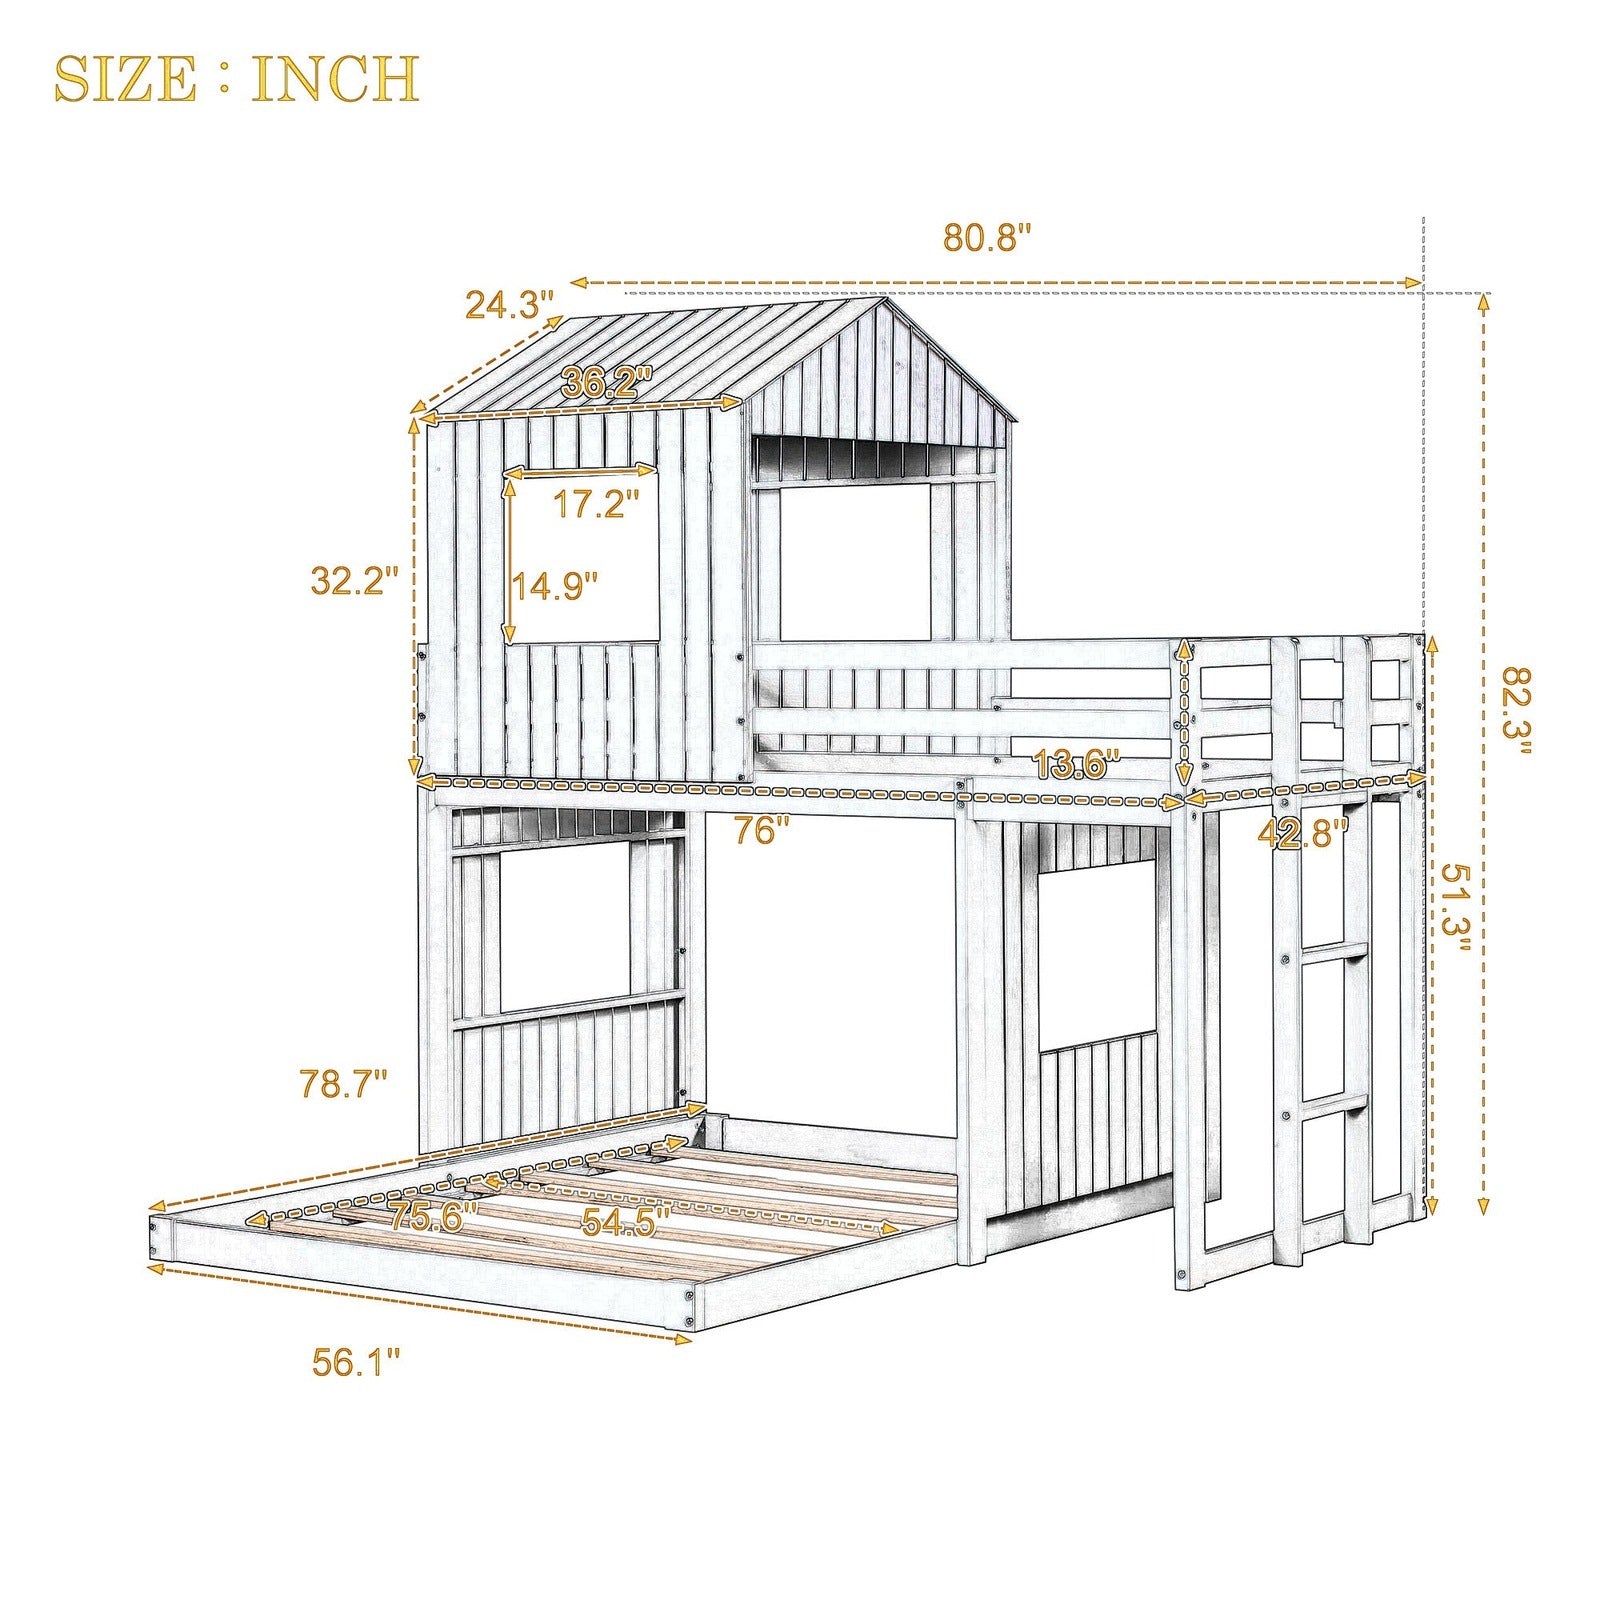 Lucky Furniture Playhouse Twin Over Full Wooden Bunk Bed - Gray